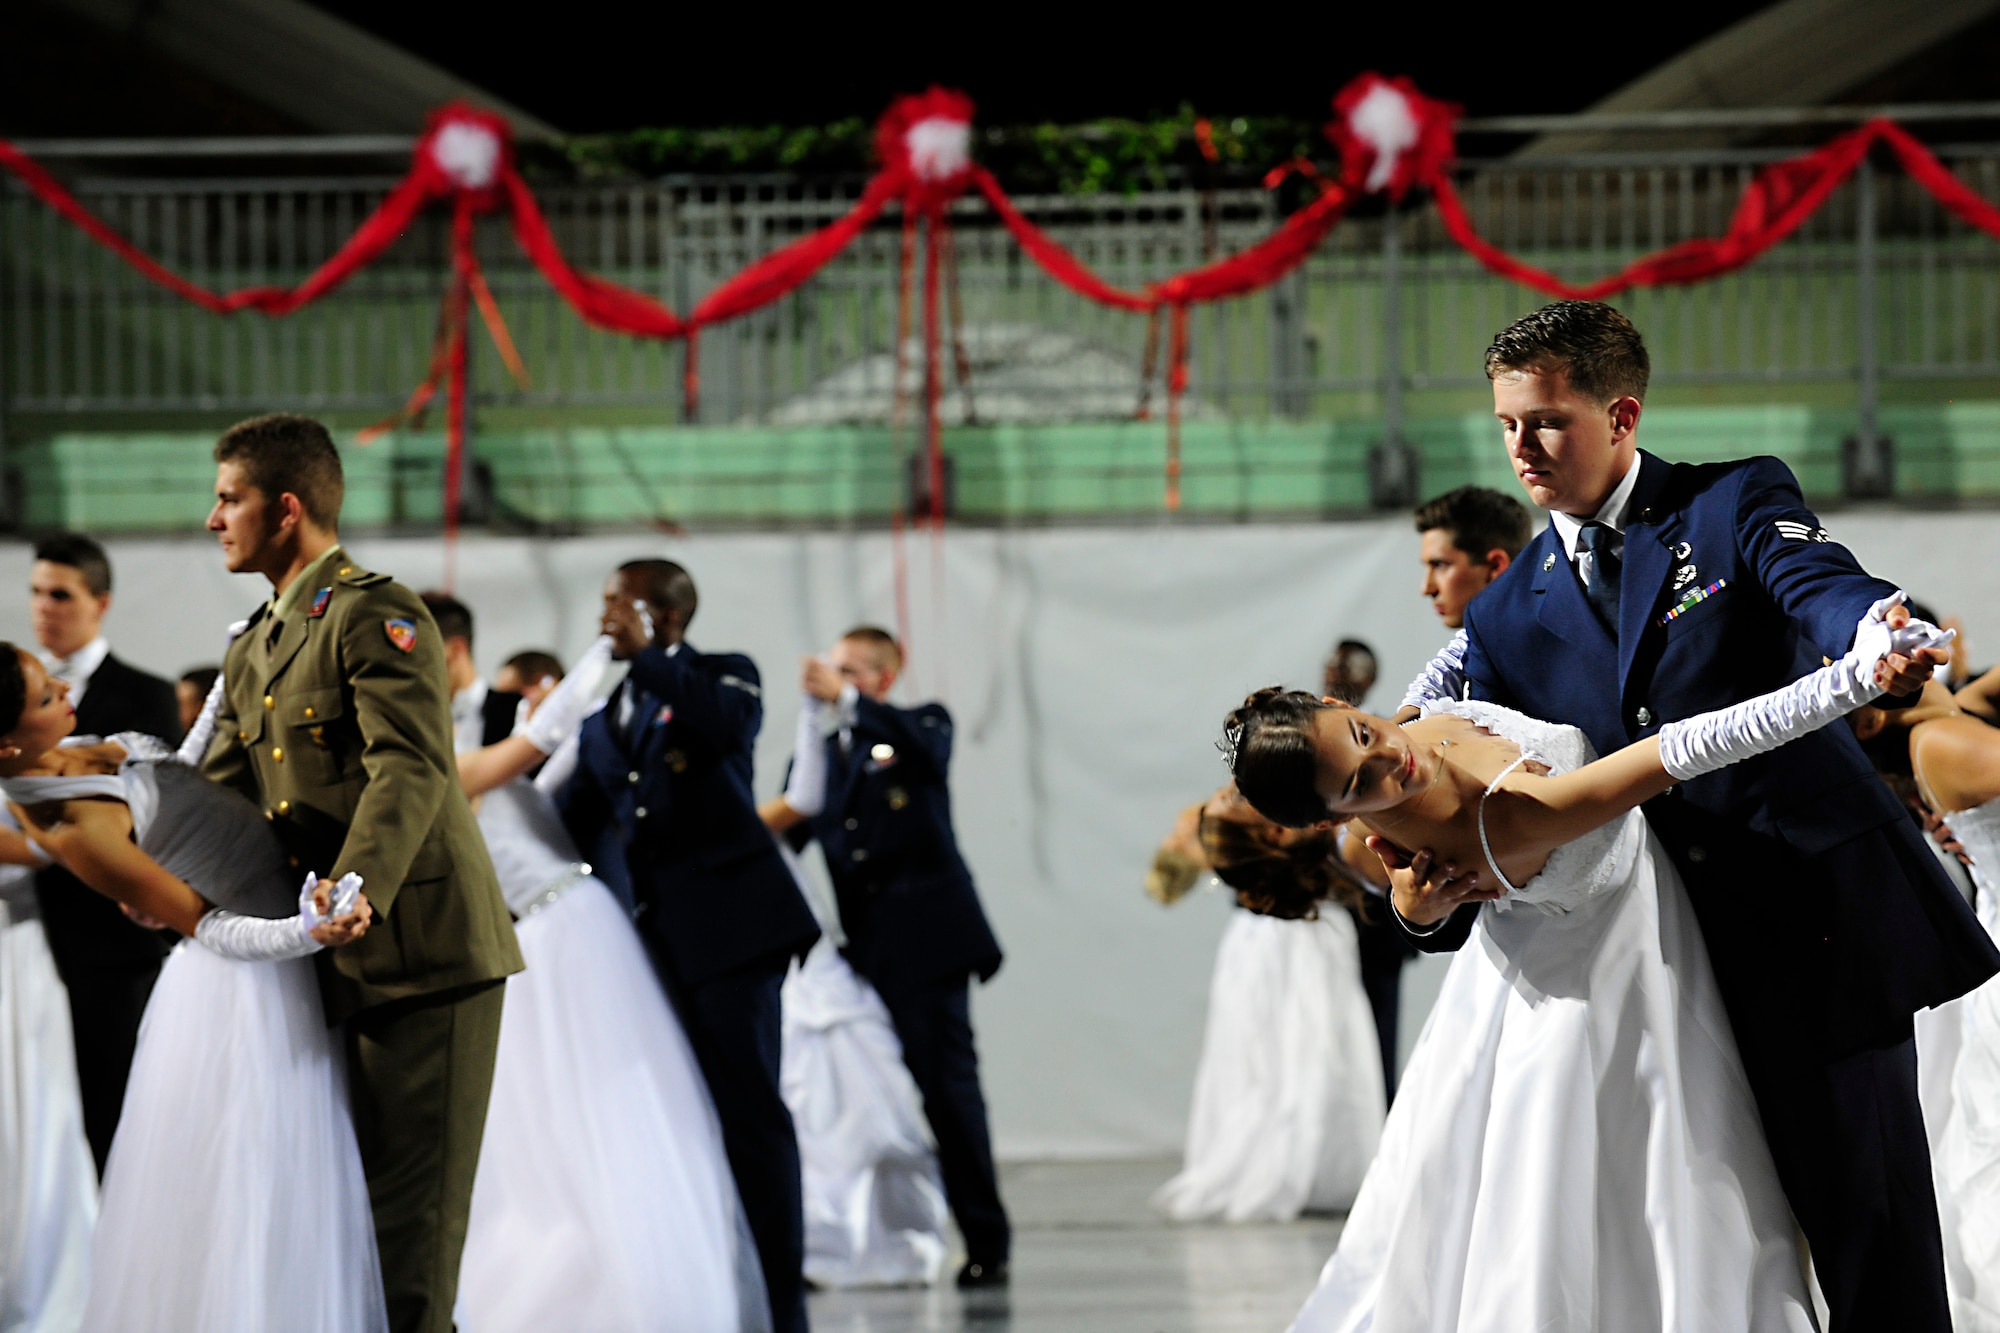 Senior Airman Joseph Schmidt, 31st Civil Engineer Squadron explosive ordnance disposal technician, dips his partner, Elena Tiozzo, during the 16th Annual Debutant Ball in Cordenons, Italy, June 22, 2014. The ball hosted 29 debutants who were accompanied by Team Aviano Airmen, Italian army soldiers and other local Italians. (U.S. Air Force photo/Airman 1st Class Ryan Conroy)